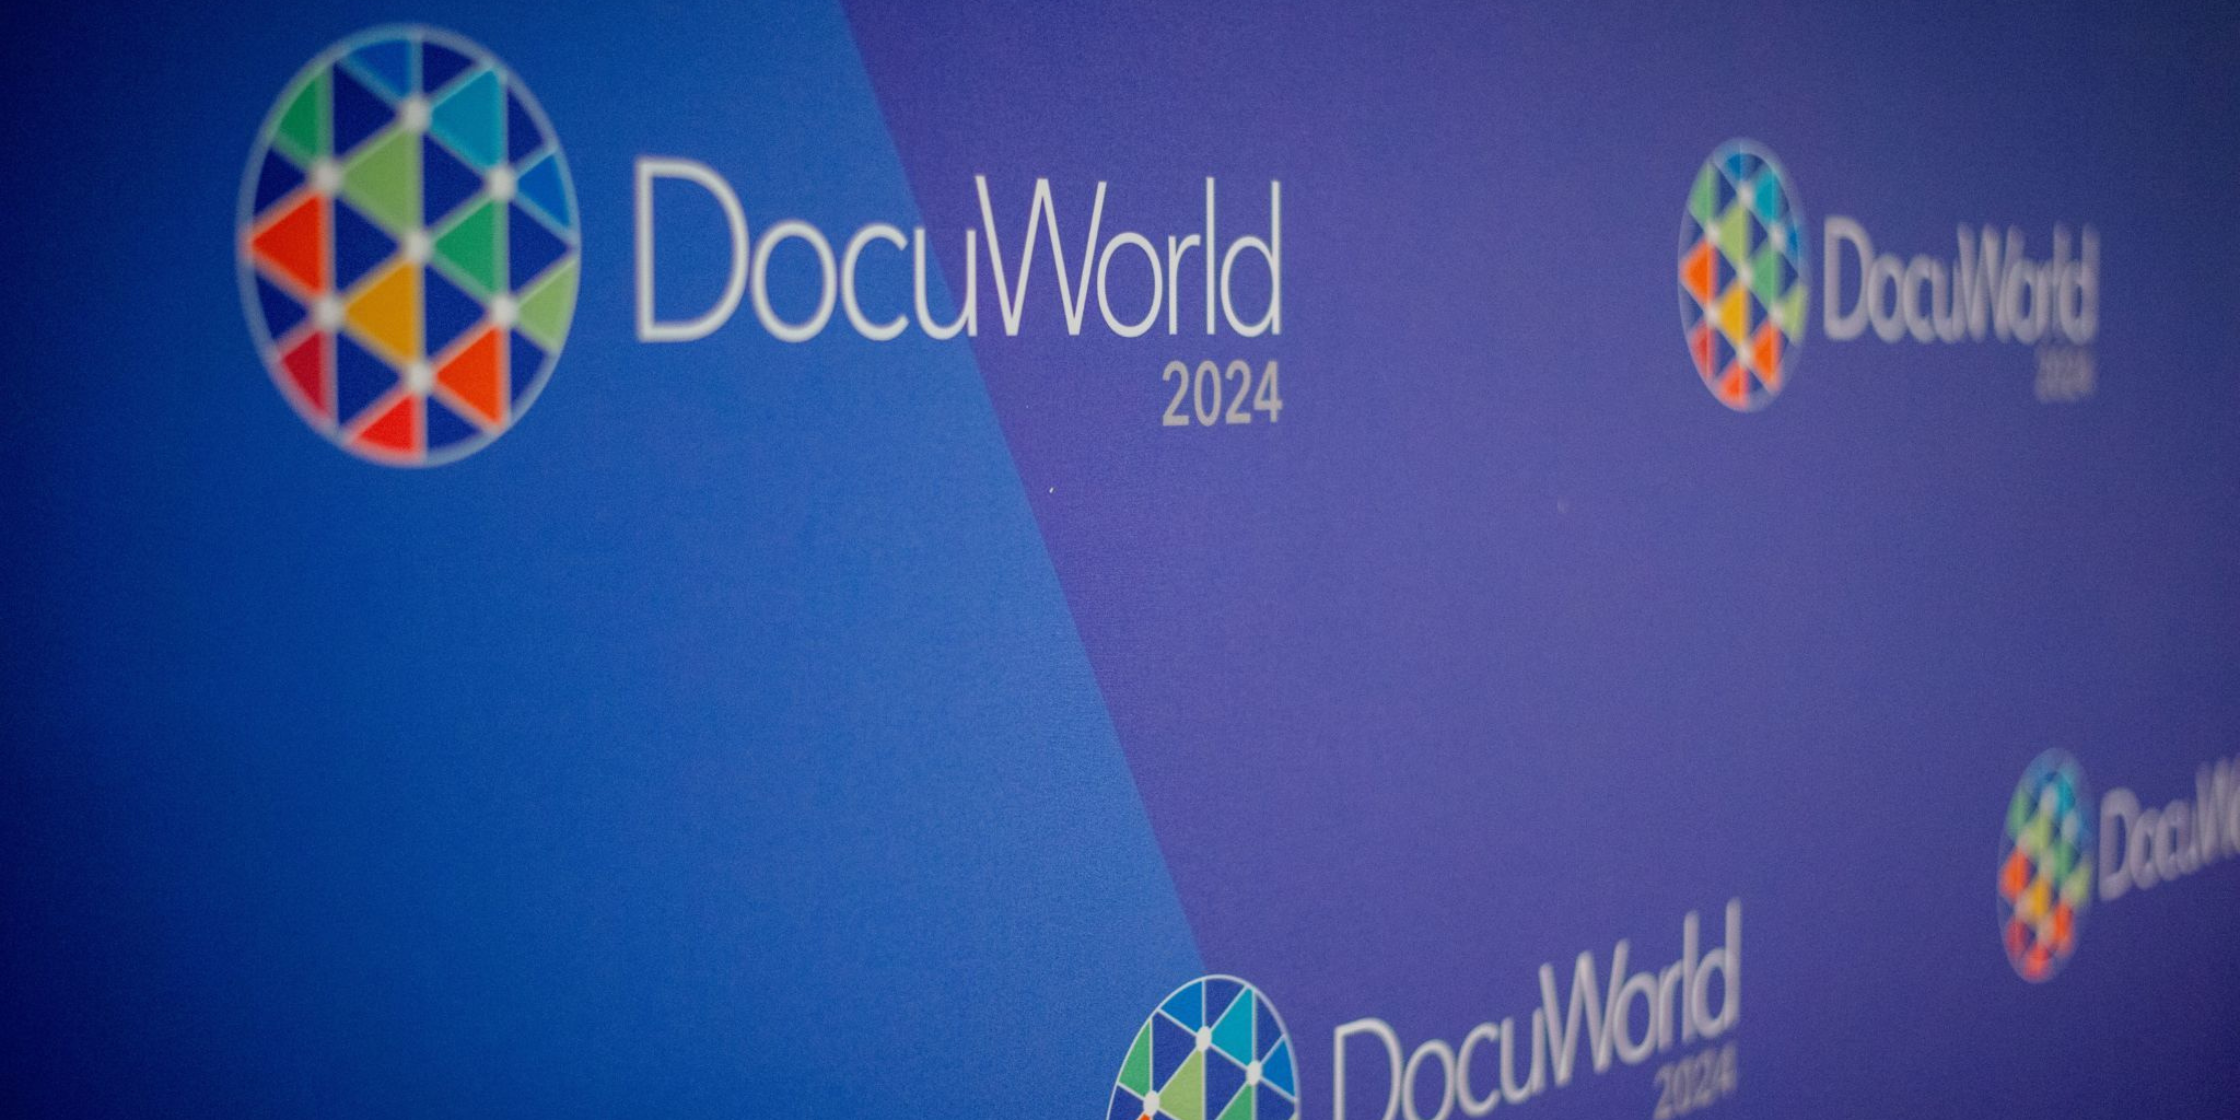 What We Learnt From DocuWorld 2024